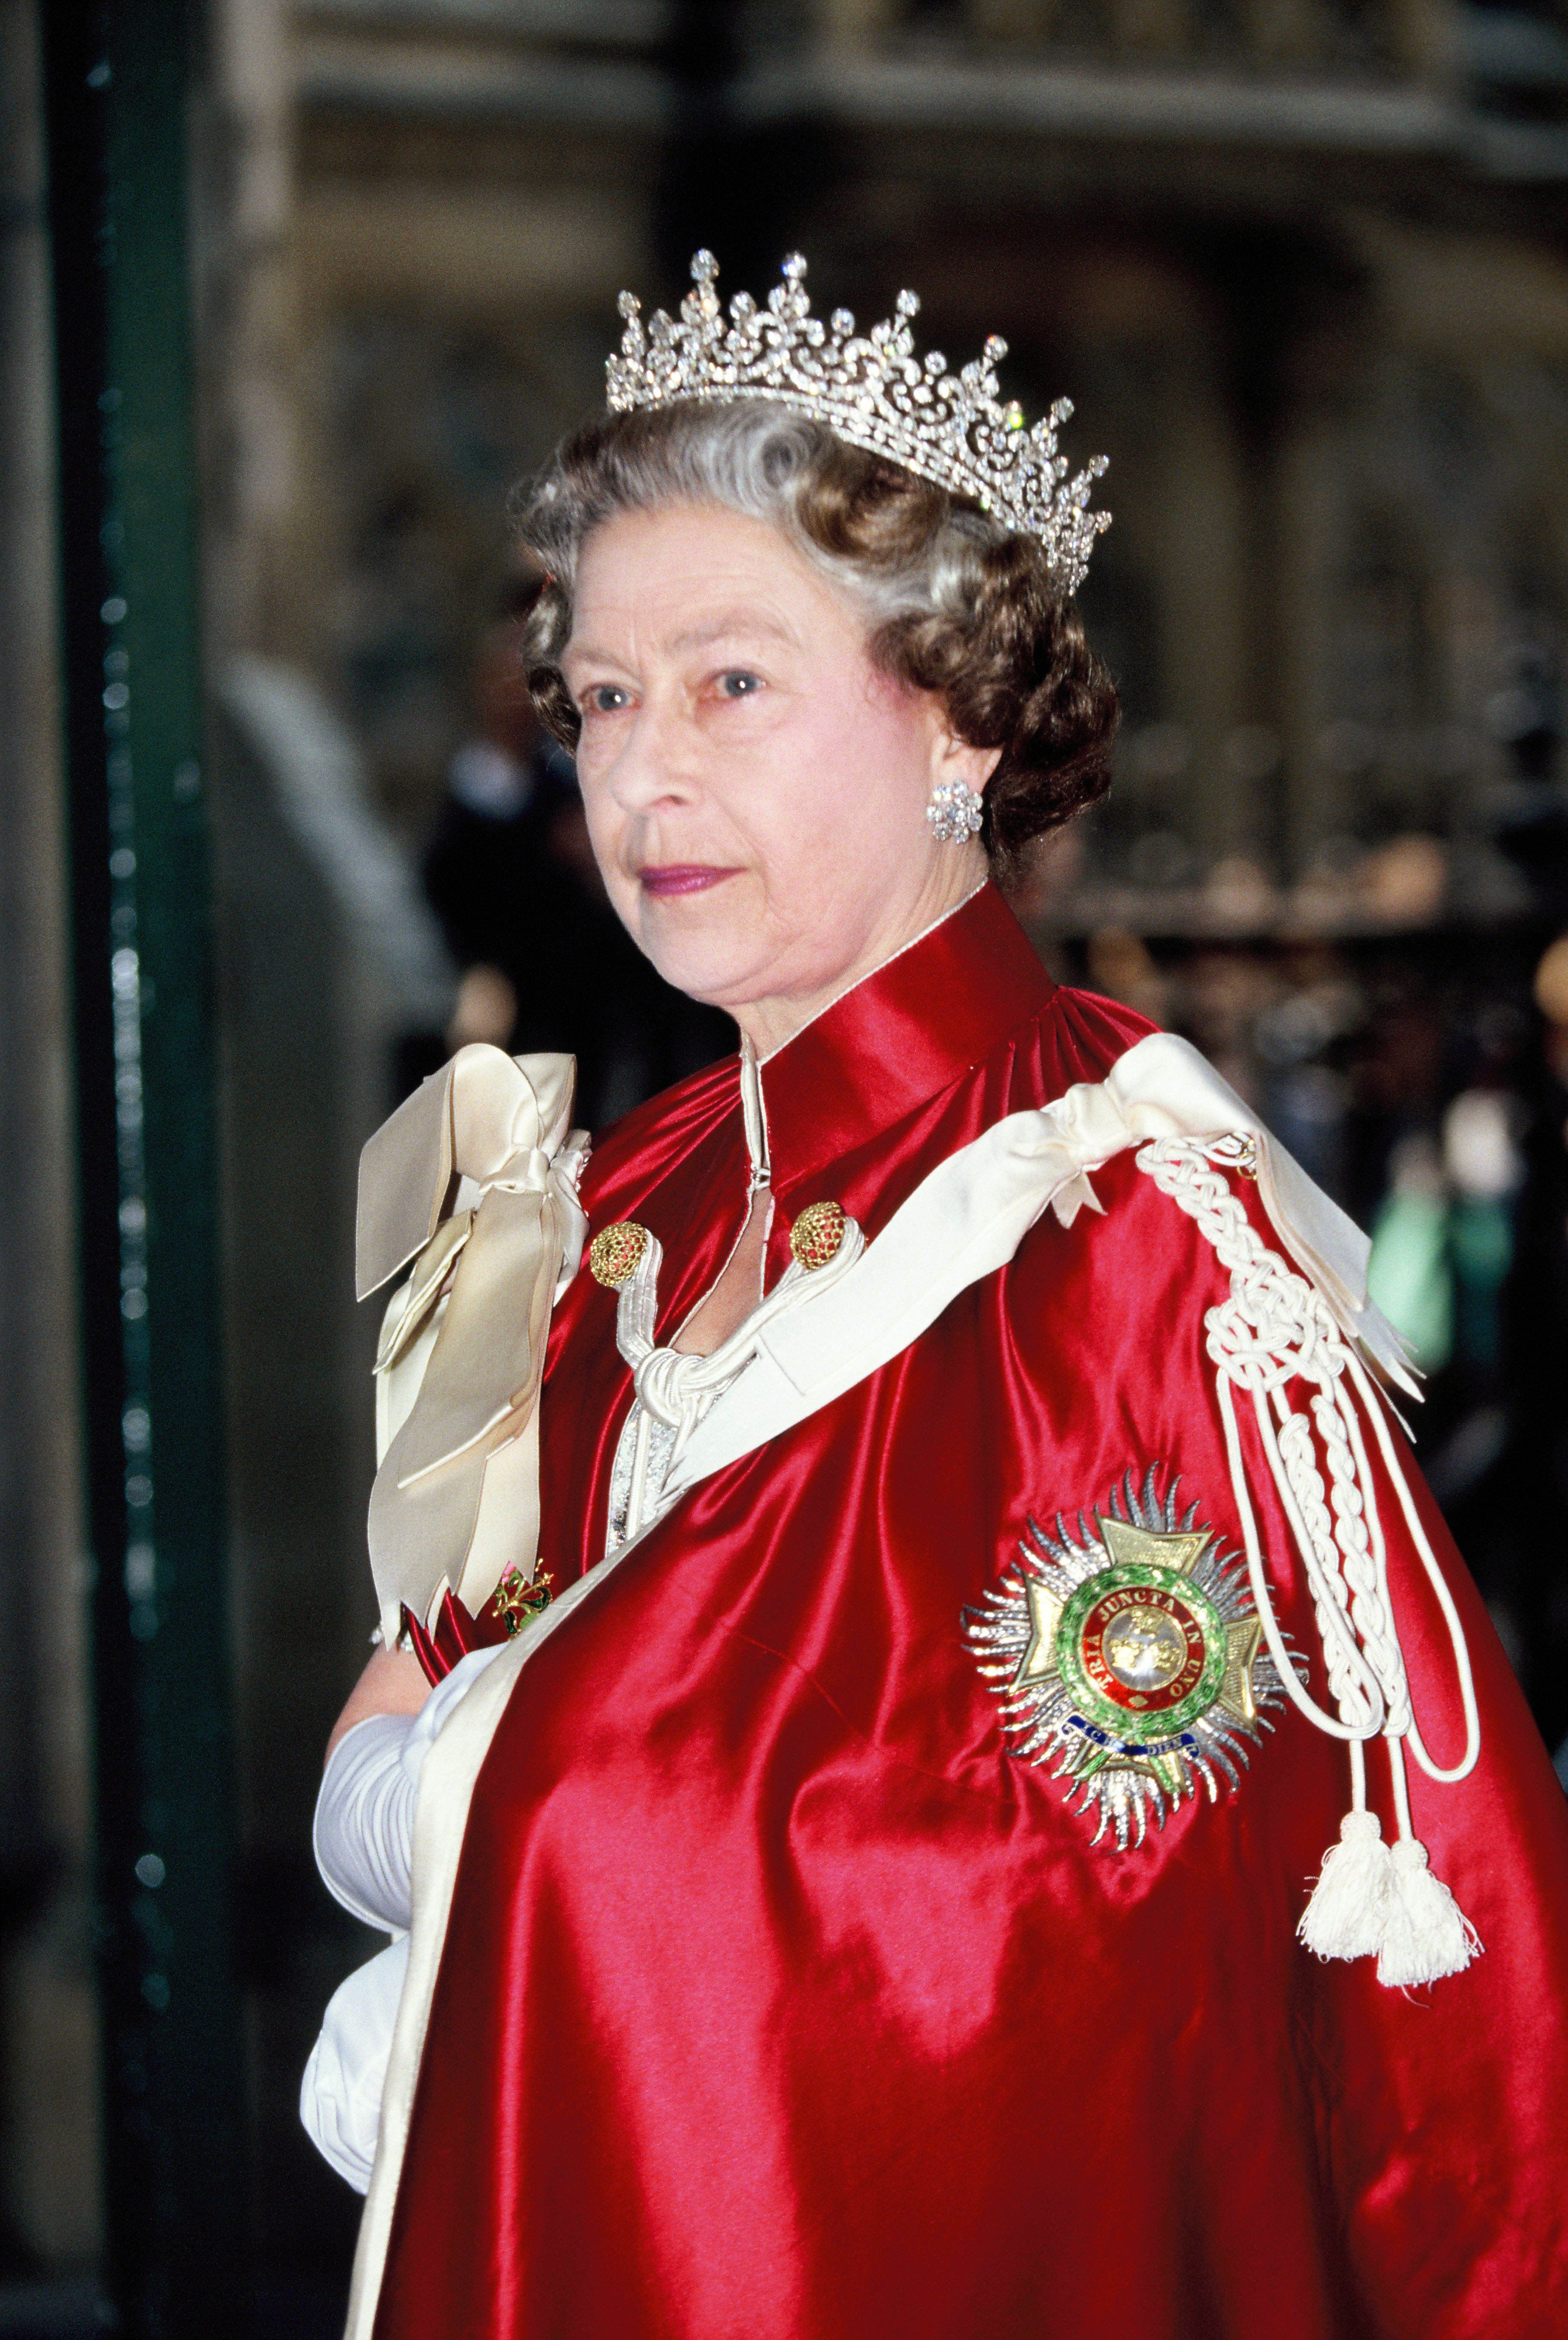 Queen Elizabeth II at the Order of the Bath service at Westminster Abbey in 1990 in London, England | Source: Getty Images